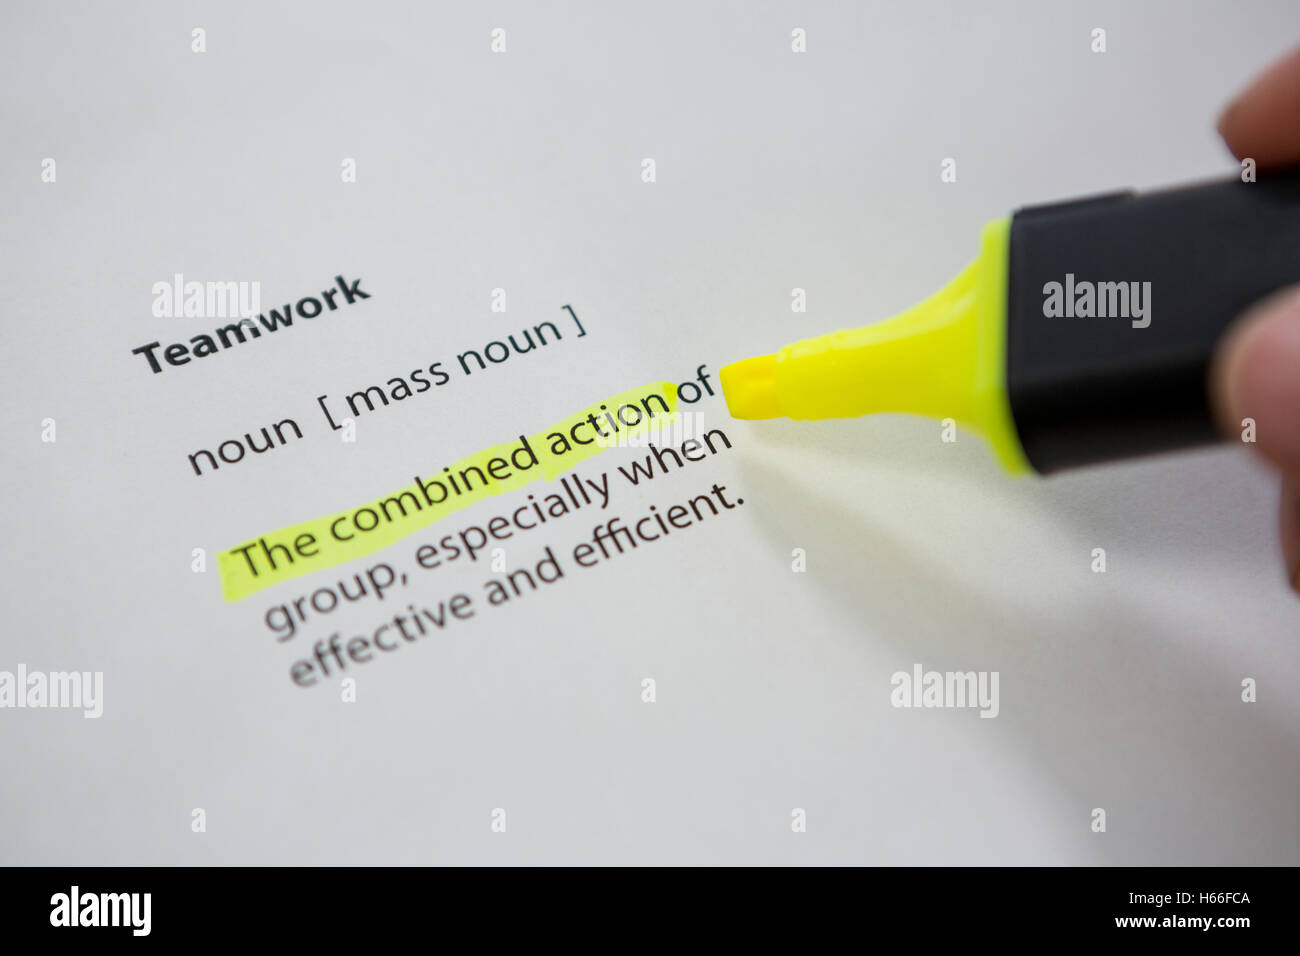 Close-up of marker pen highlighting text Stock Photo